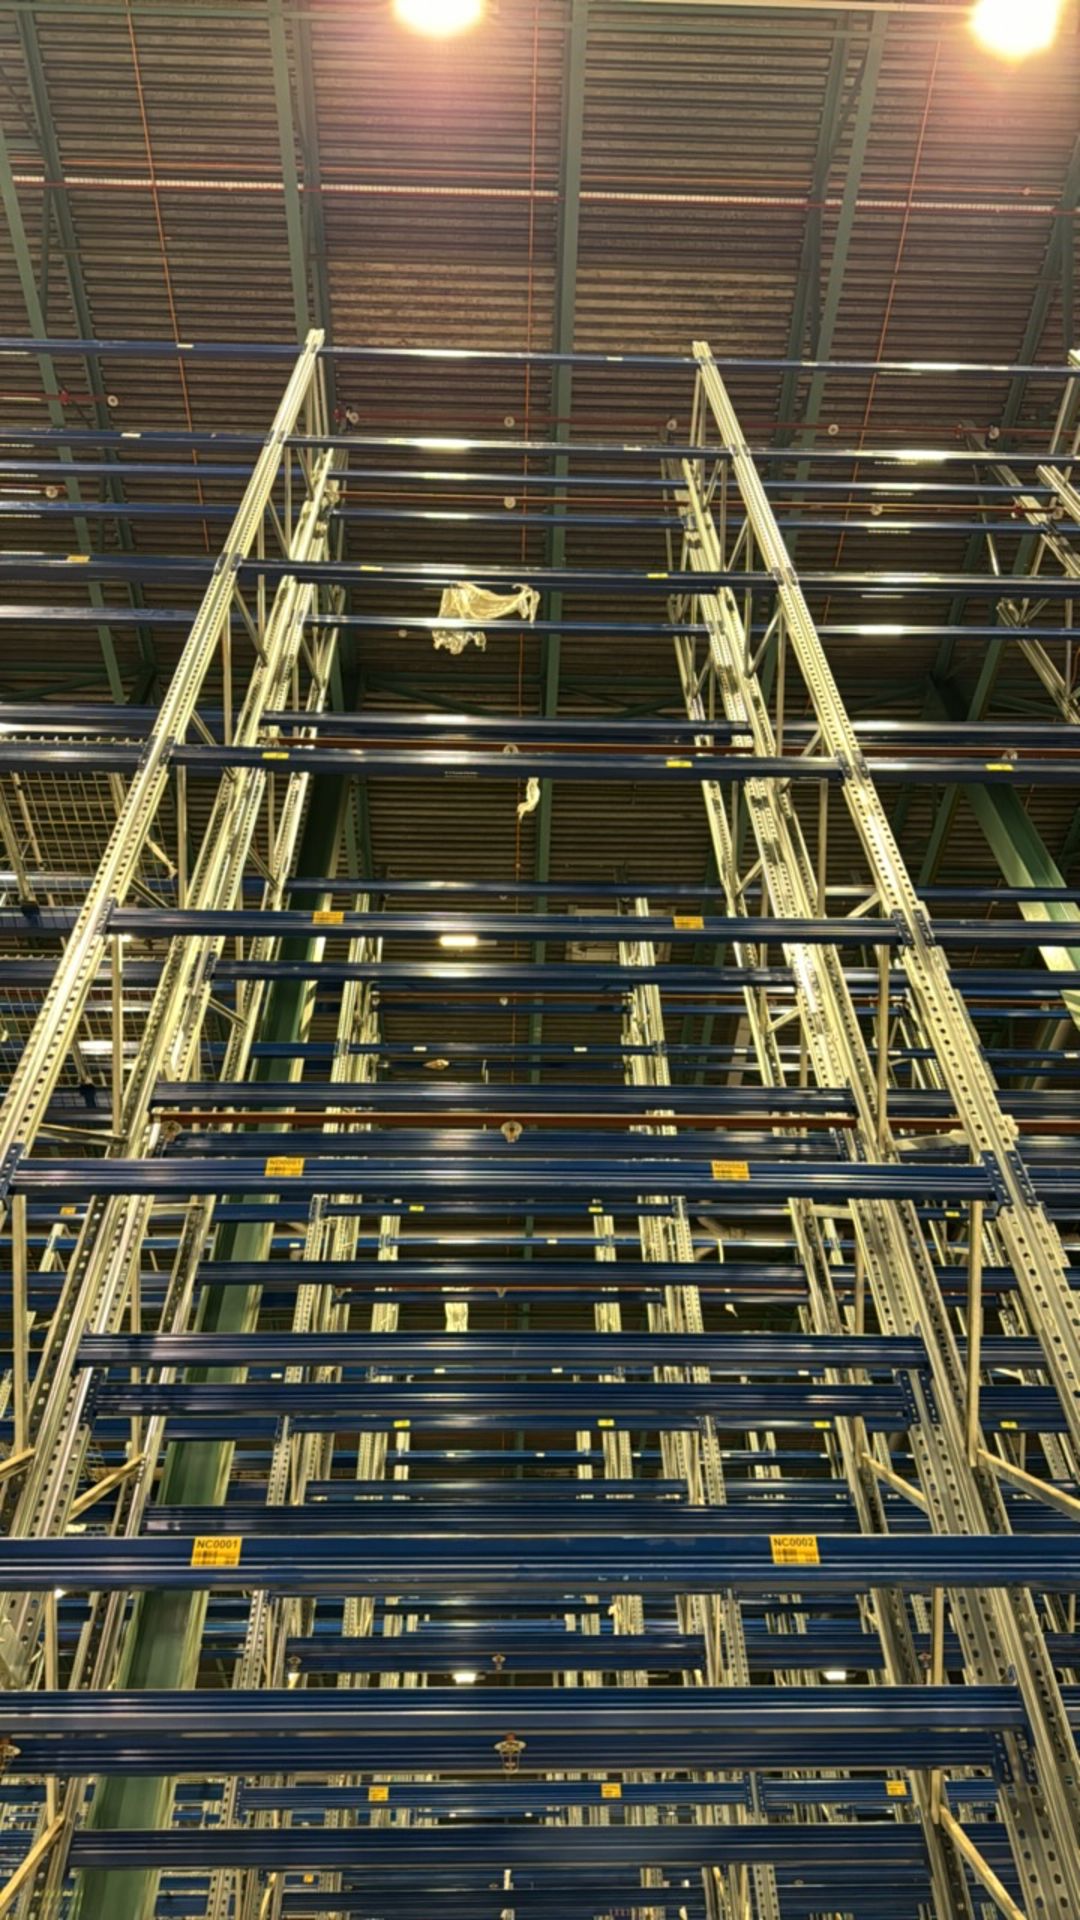 Run Of 32 Bays Of Back To Back Boltless Pallet Racking - Image 6 of 10